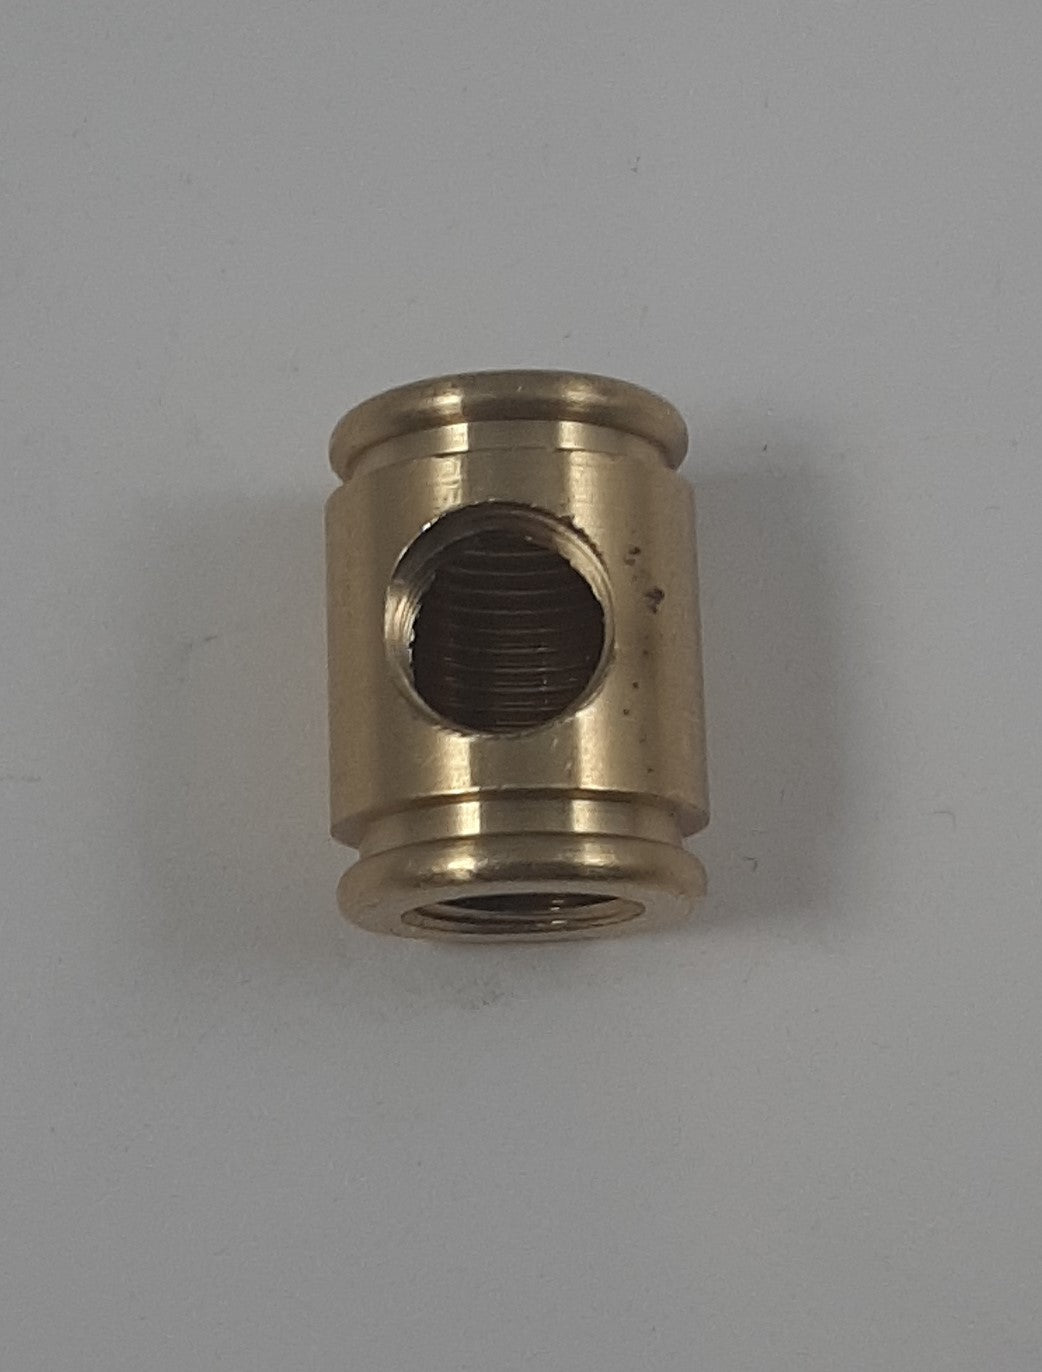 Brass Arm End - 1/8 IP (Heavy Wall)